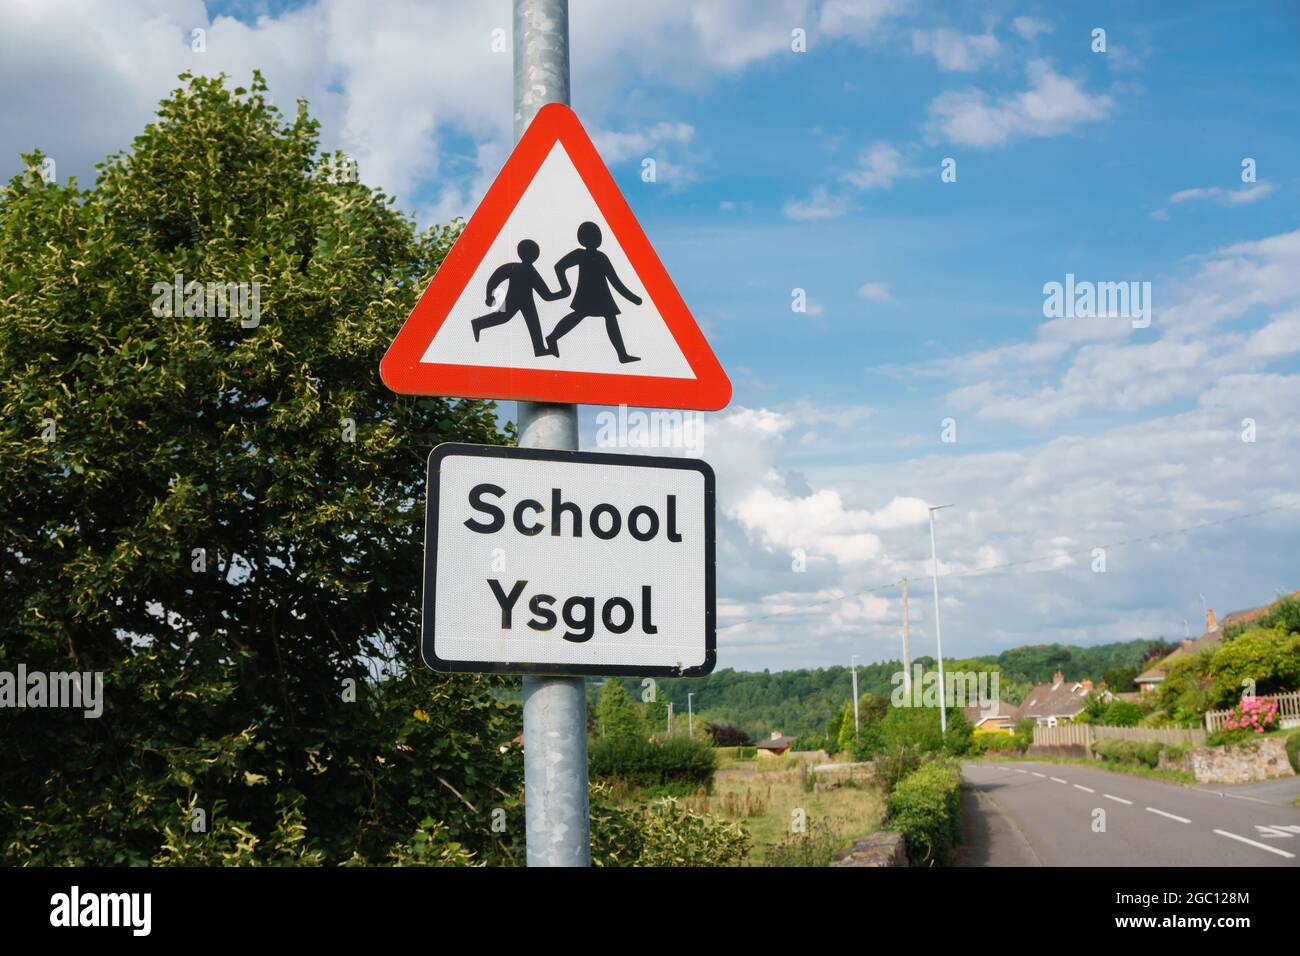 Bilingual school crossing warning sign in Welsh and English languages in rural North Wales UK Stock Photo